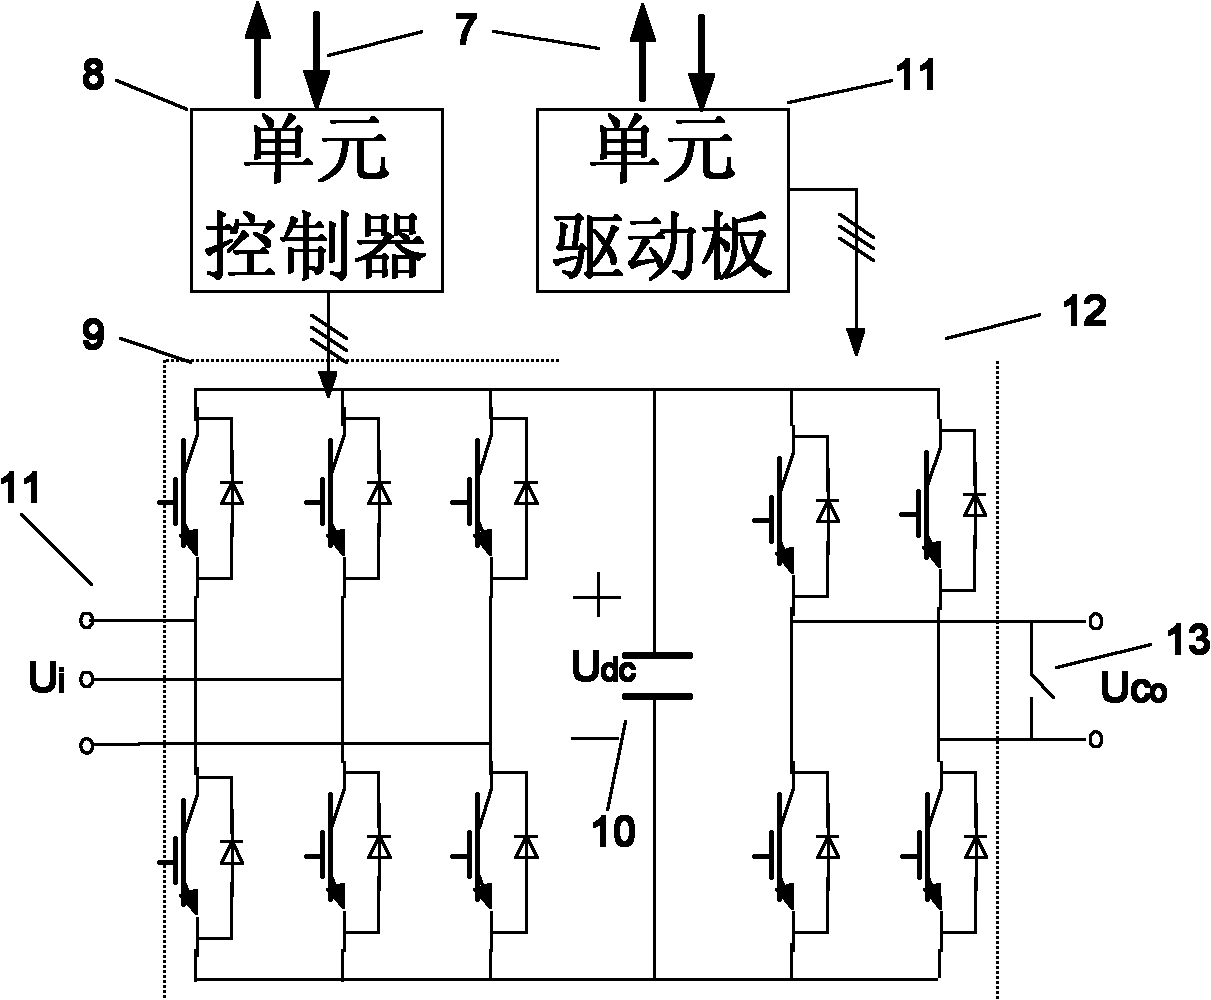 Comprehensive control system and method based on high voltage motor control and reactive power compensation